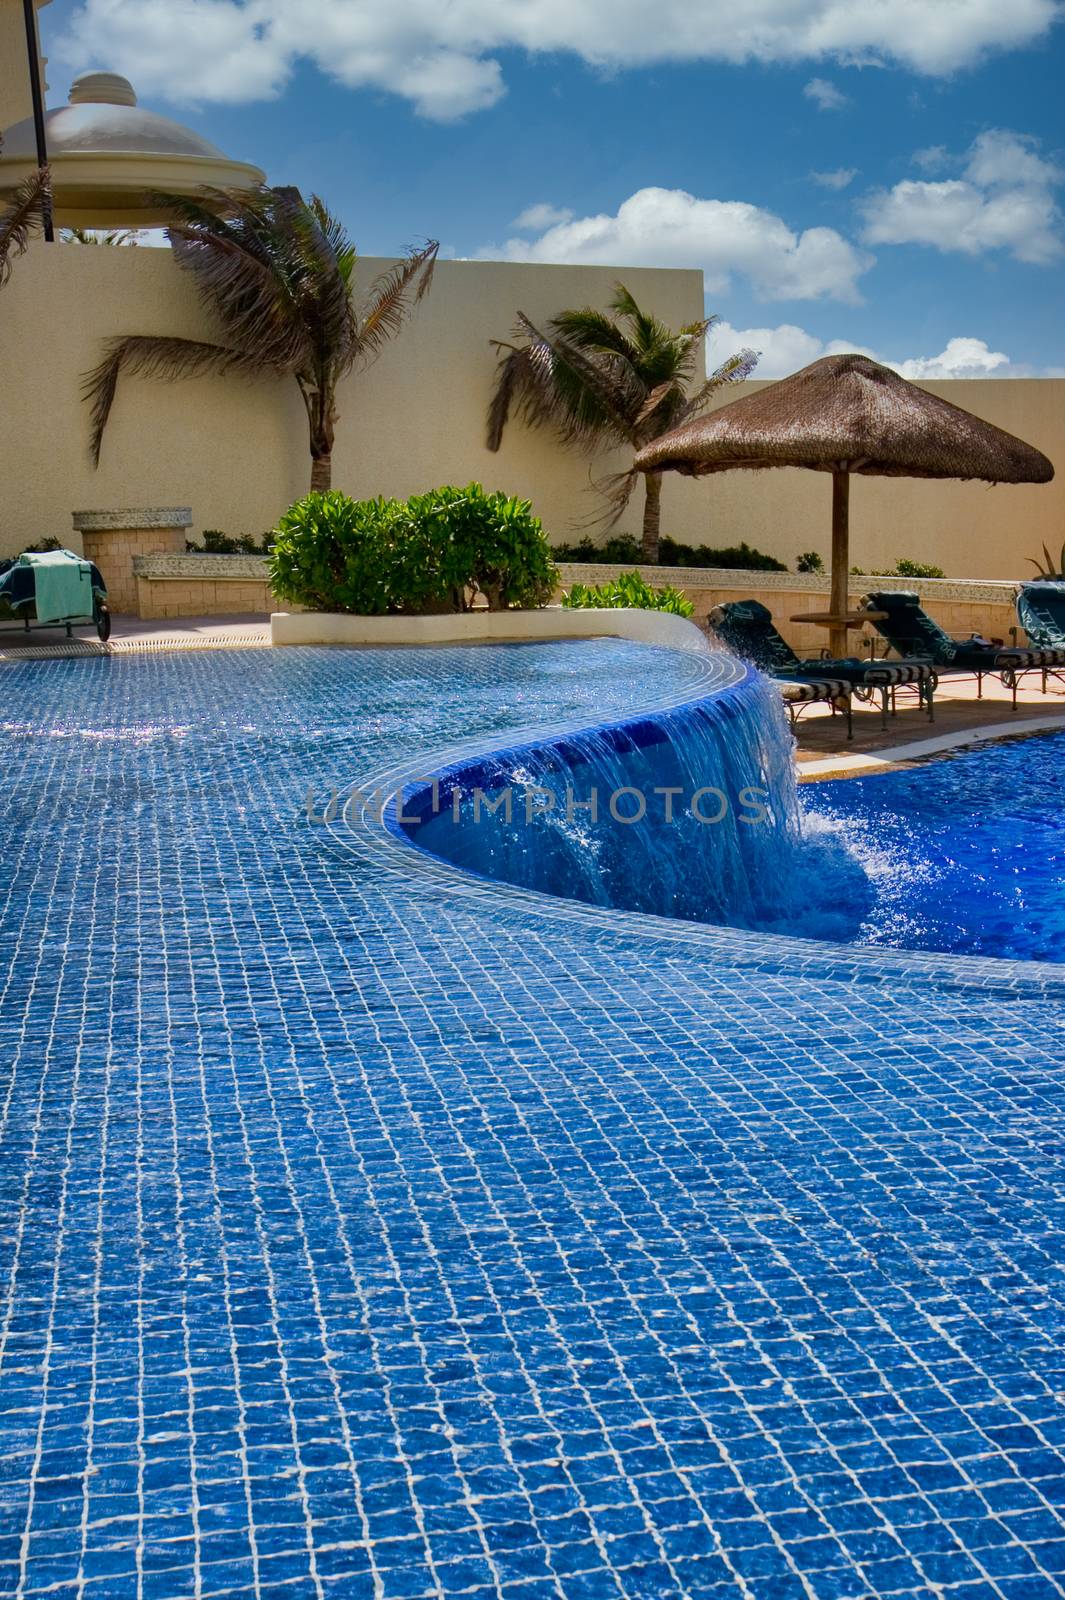 A curved pool and waterfall at a tropical resort hotel